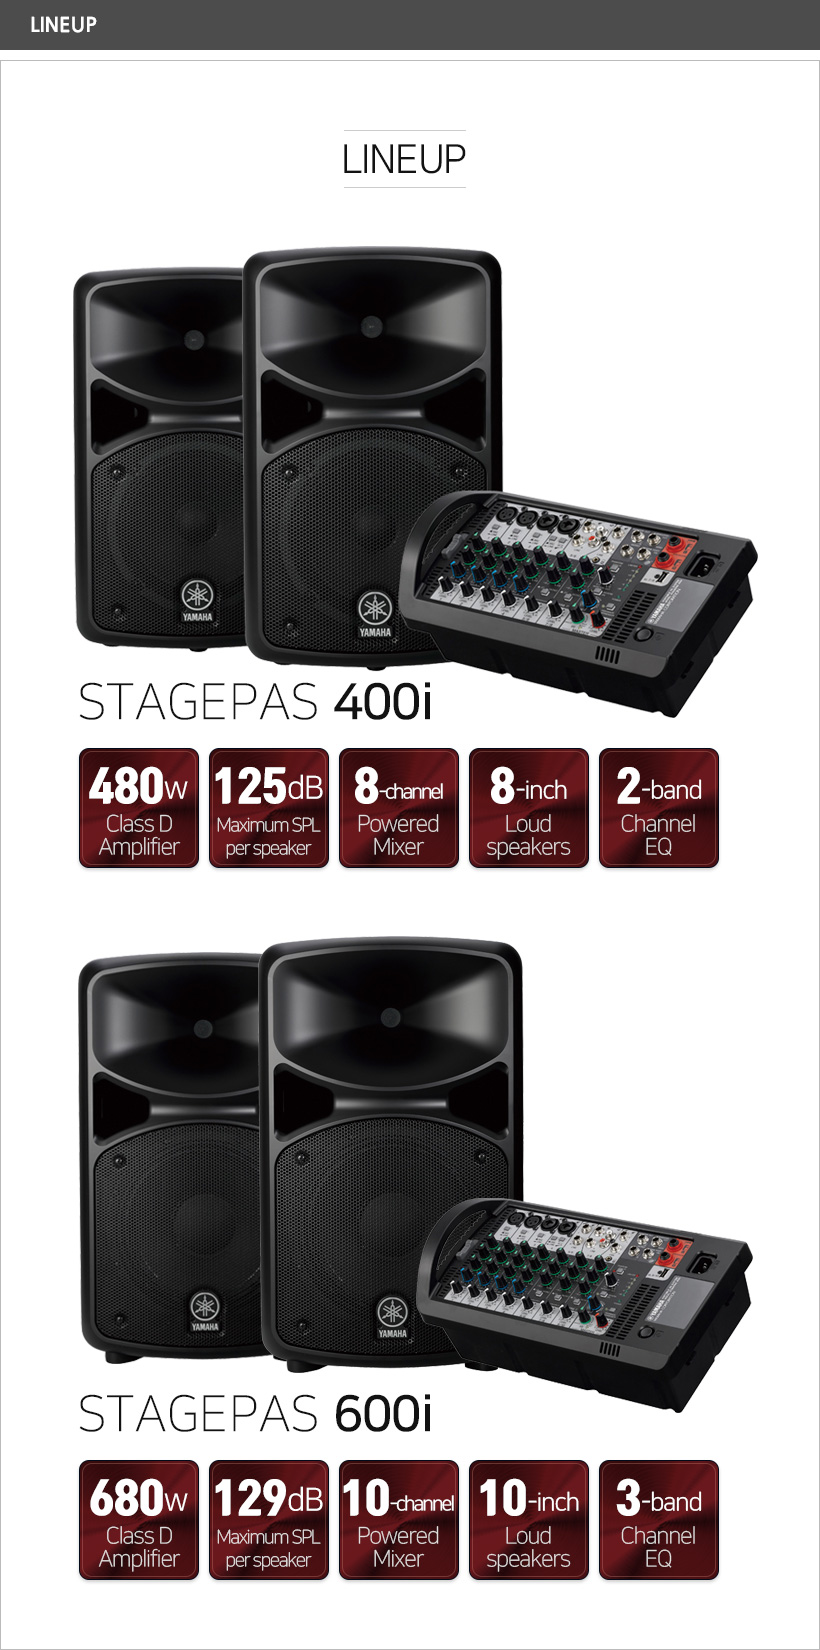 STAGEPAS 600i LINEUP